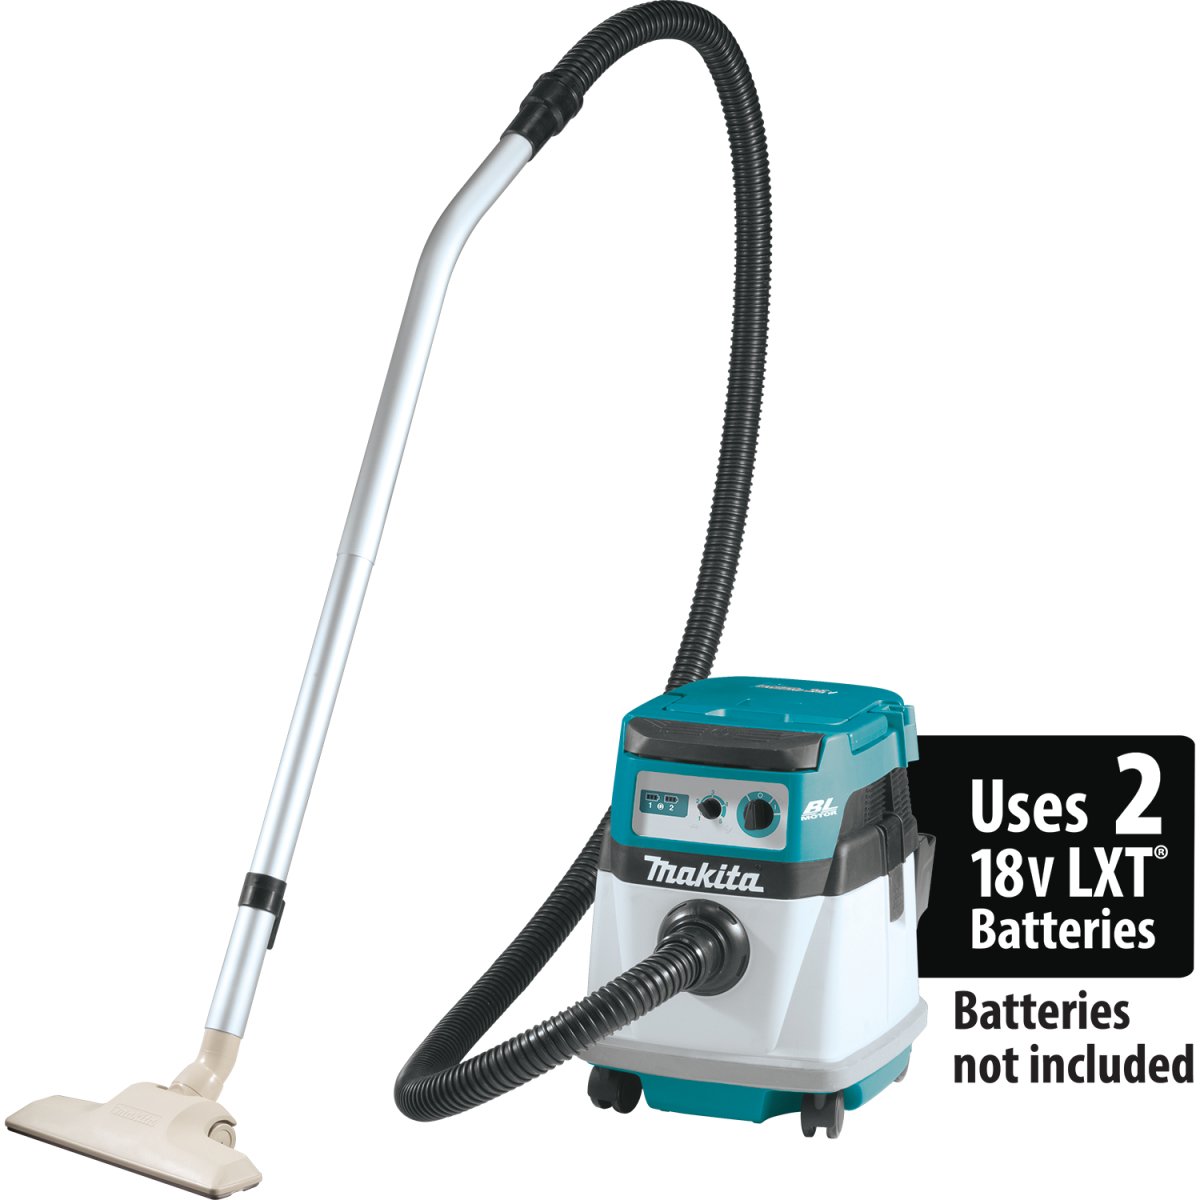 Cordless Vacuum Cleaners Dust Extraction and Collection